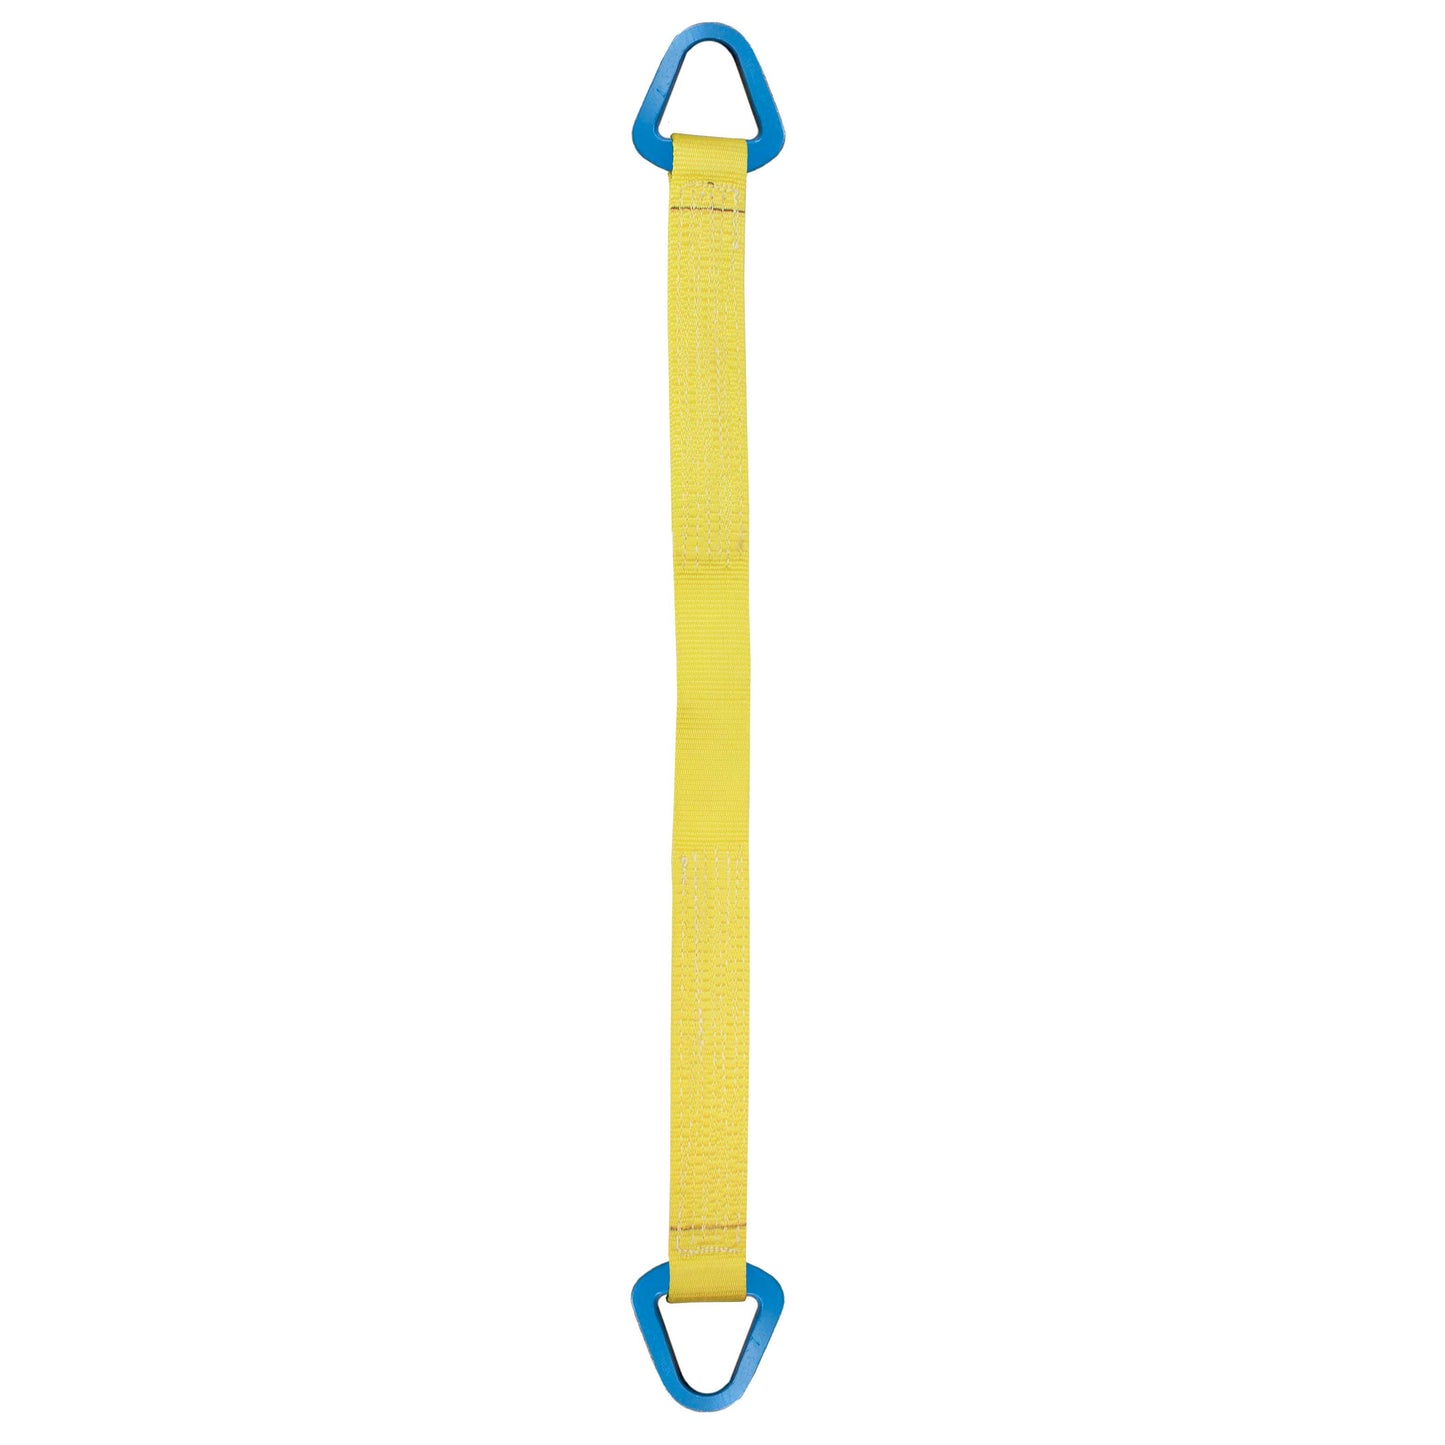 Nylon Lifting Sling Triangle 6 inch x 6 foot 2ply image 1 of 2